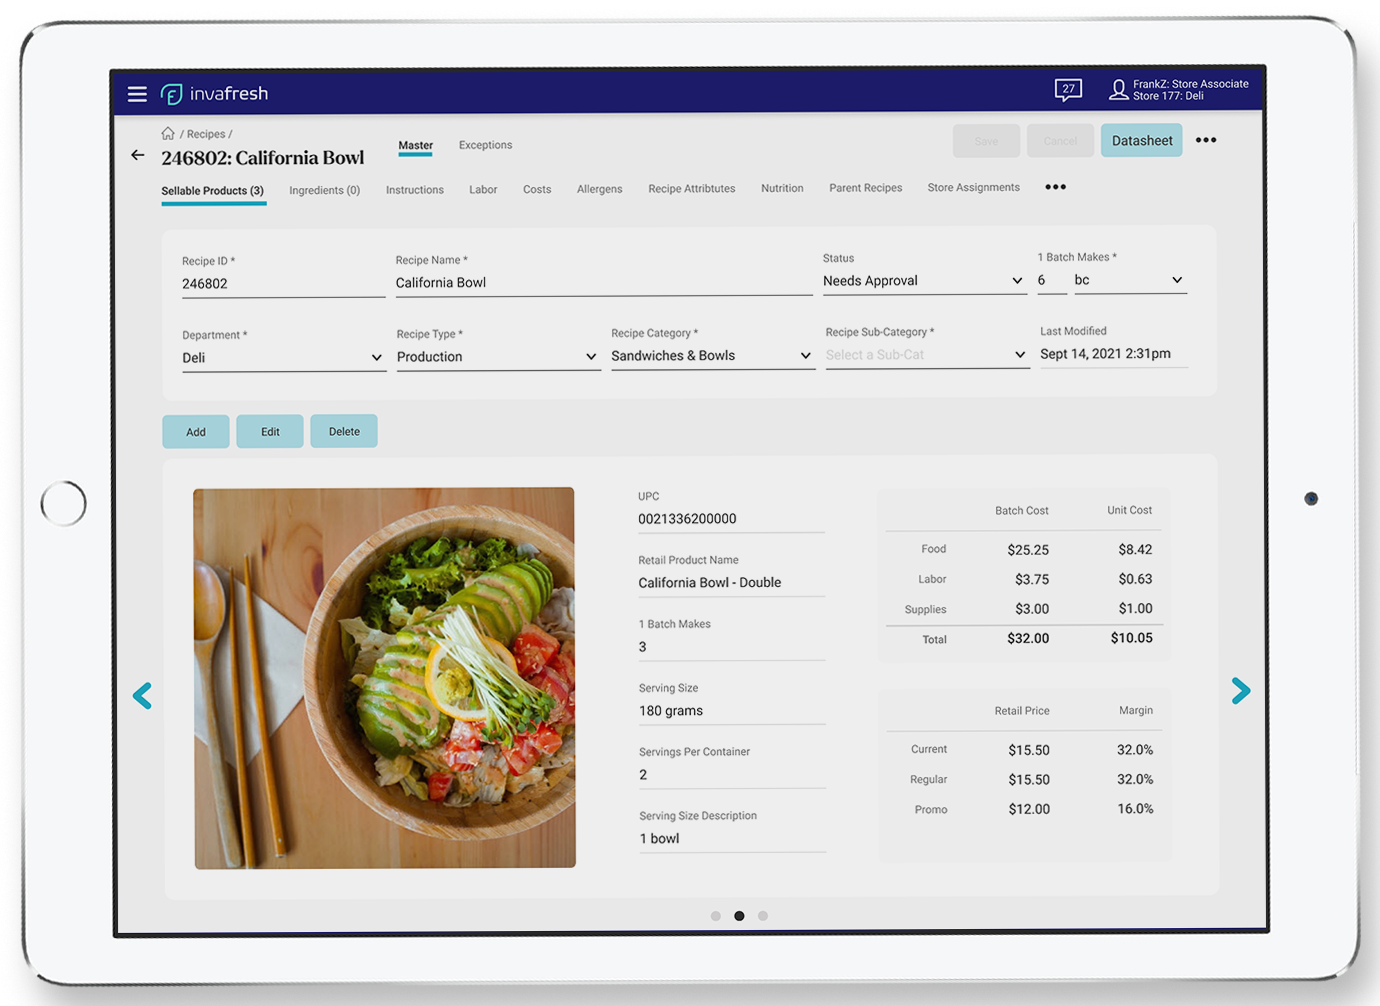 Centralized recipe management software to create, store, and manage recipes for retail products produced in store, all in one place